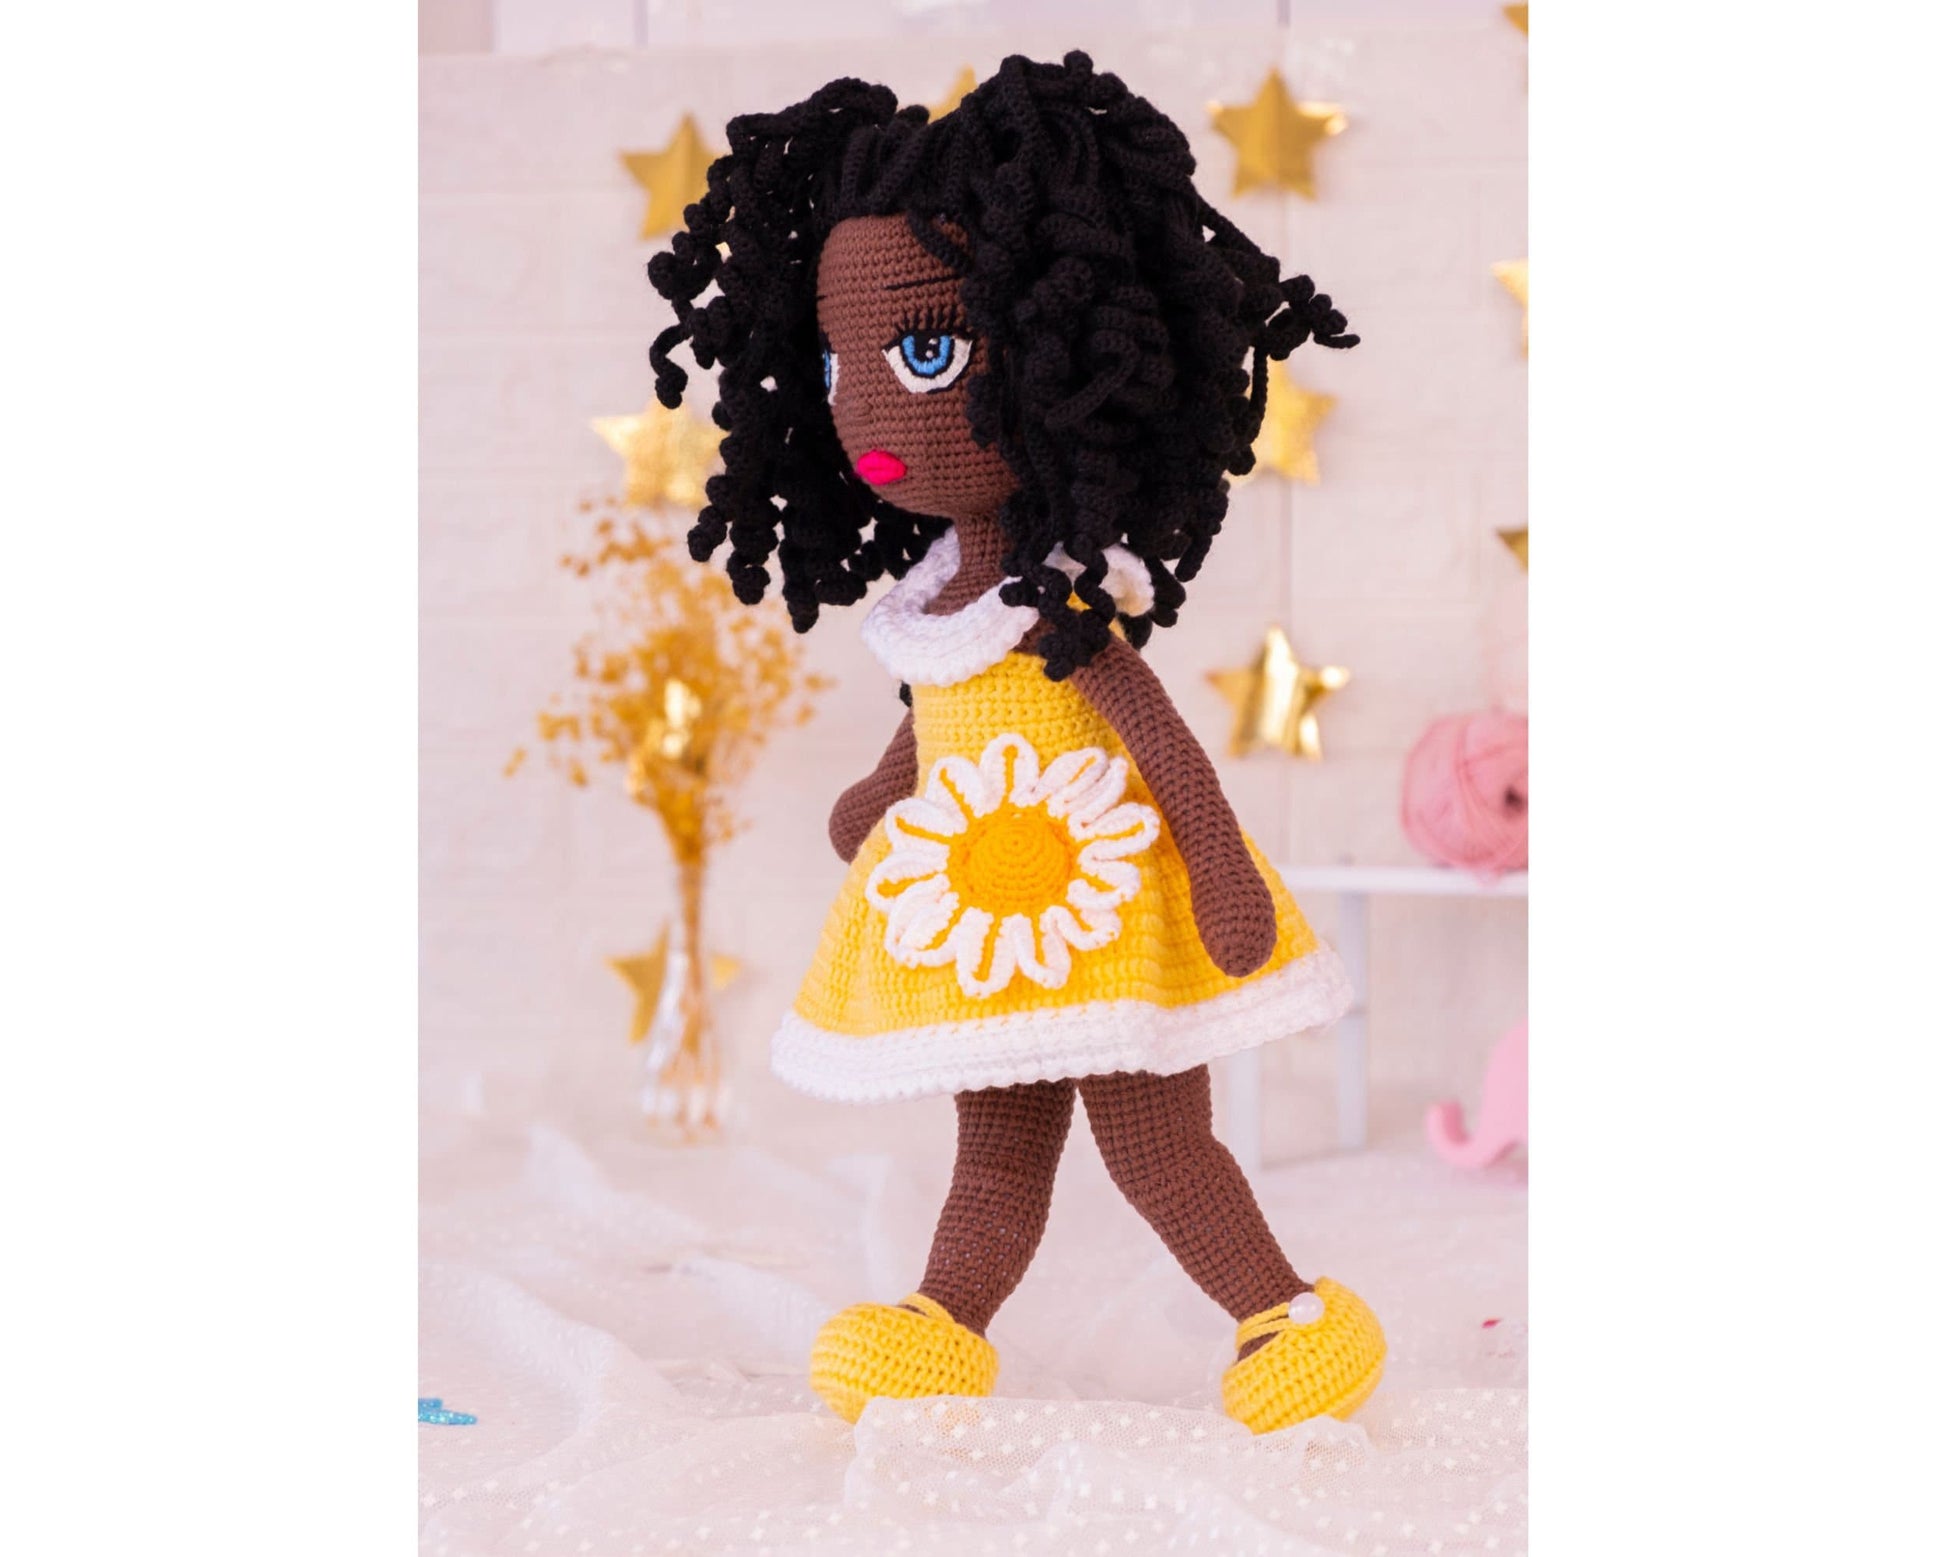 Crochet Doll Black Girl, Curly Hair Doll, Amigurumi Doll, Granddaughter Gift, Daughter Gift, Christmas Doll, Knitted Dolls, Yellow Doll